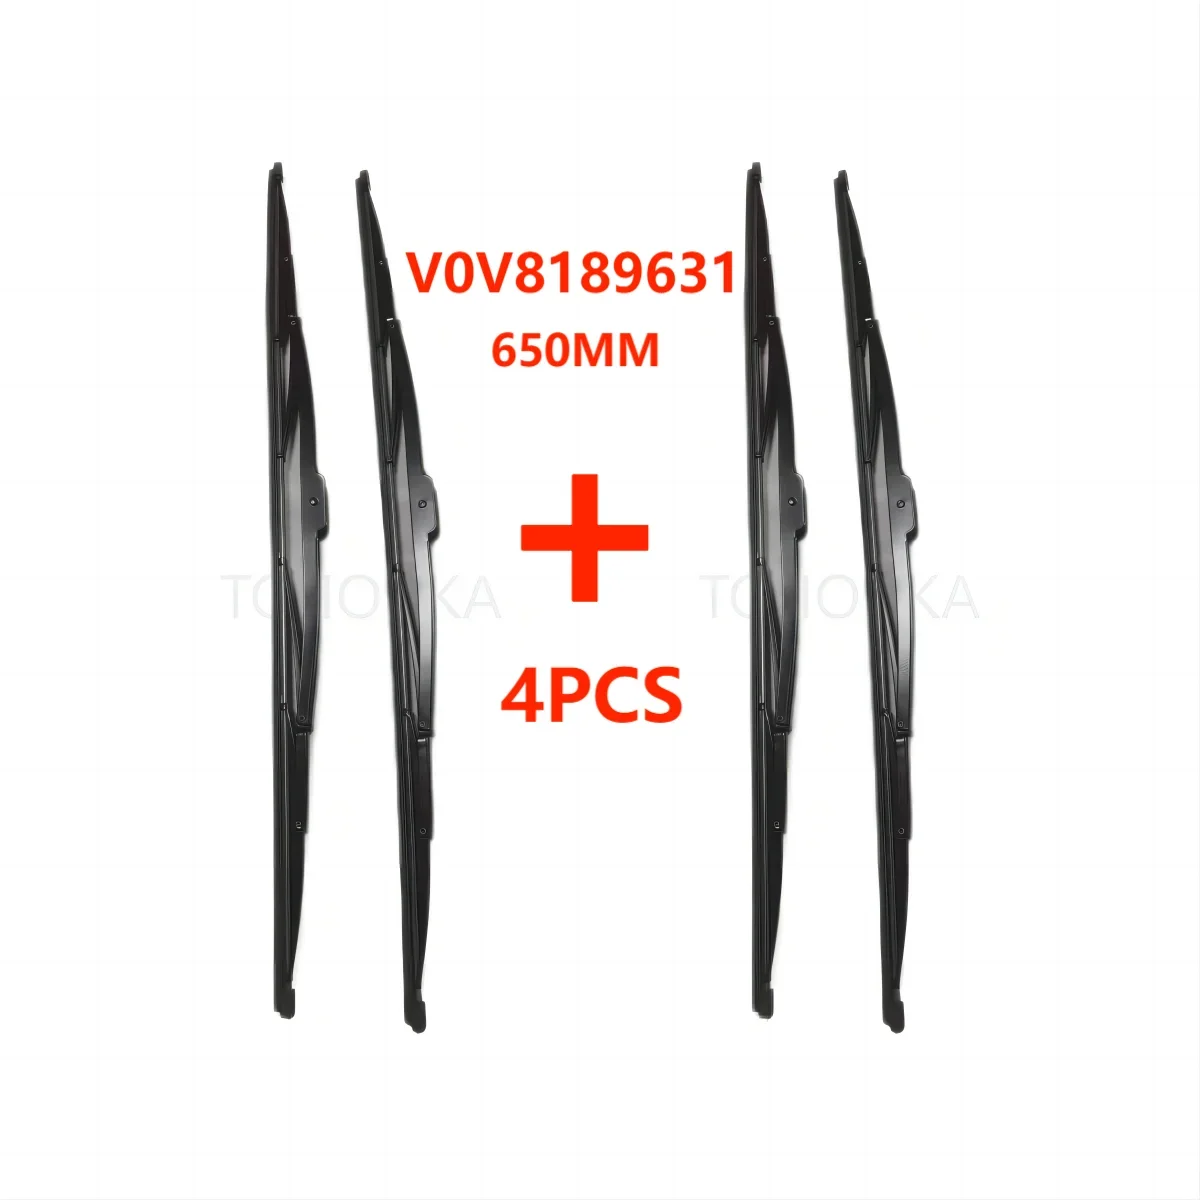 

4 PCS In 650mm Suitable for Volvo DAF IVECO Truck Wiper Slices OEM 8189631 8143709 84035947 20537740 20826591 1517868 42324389